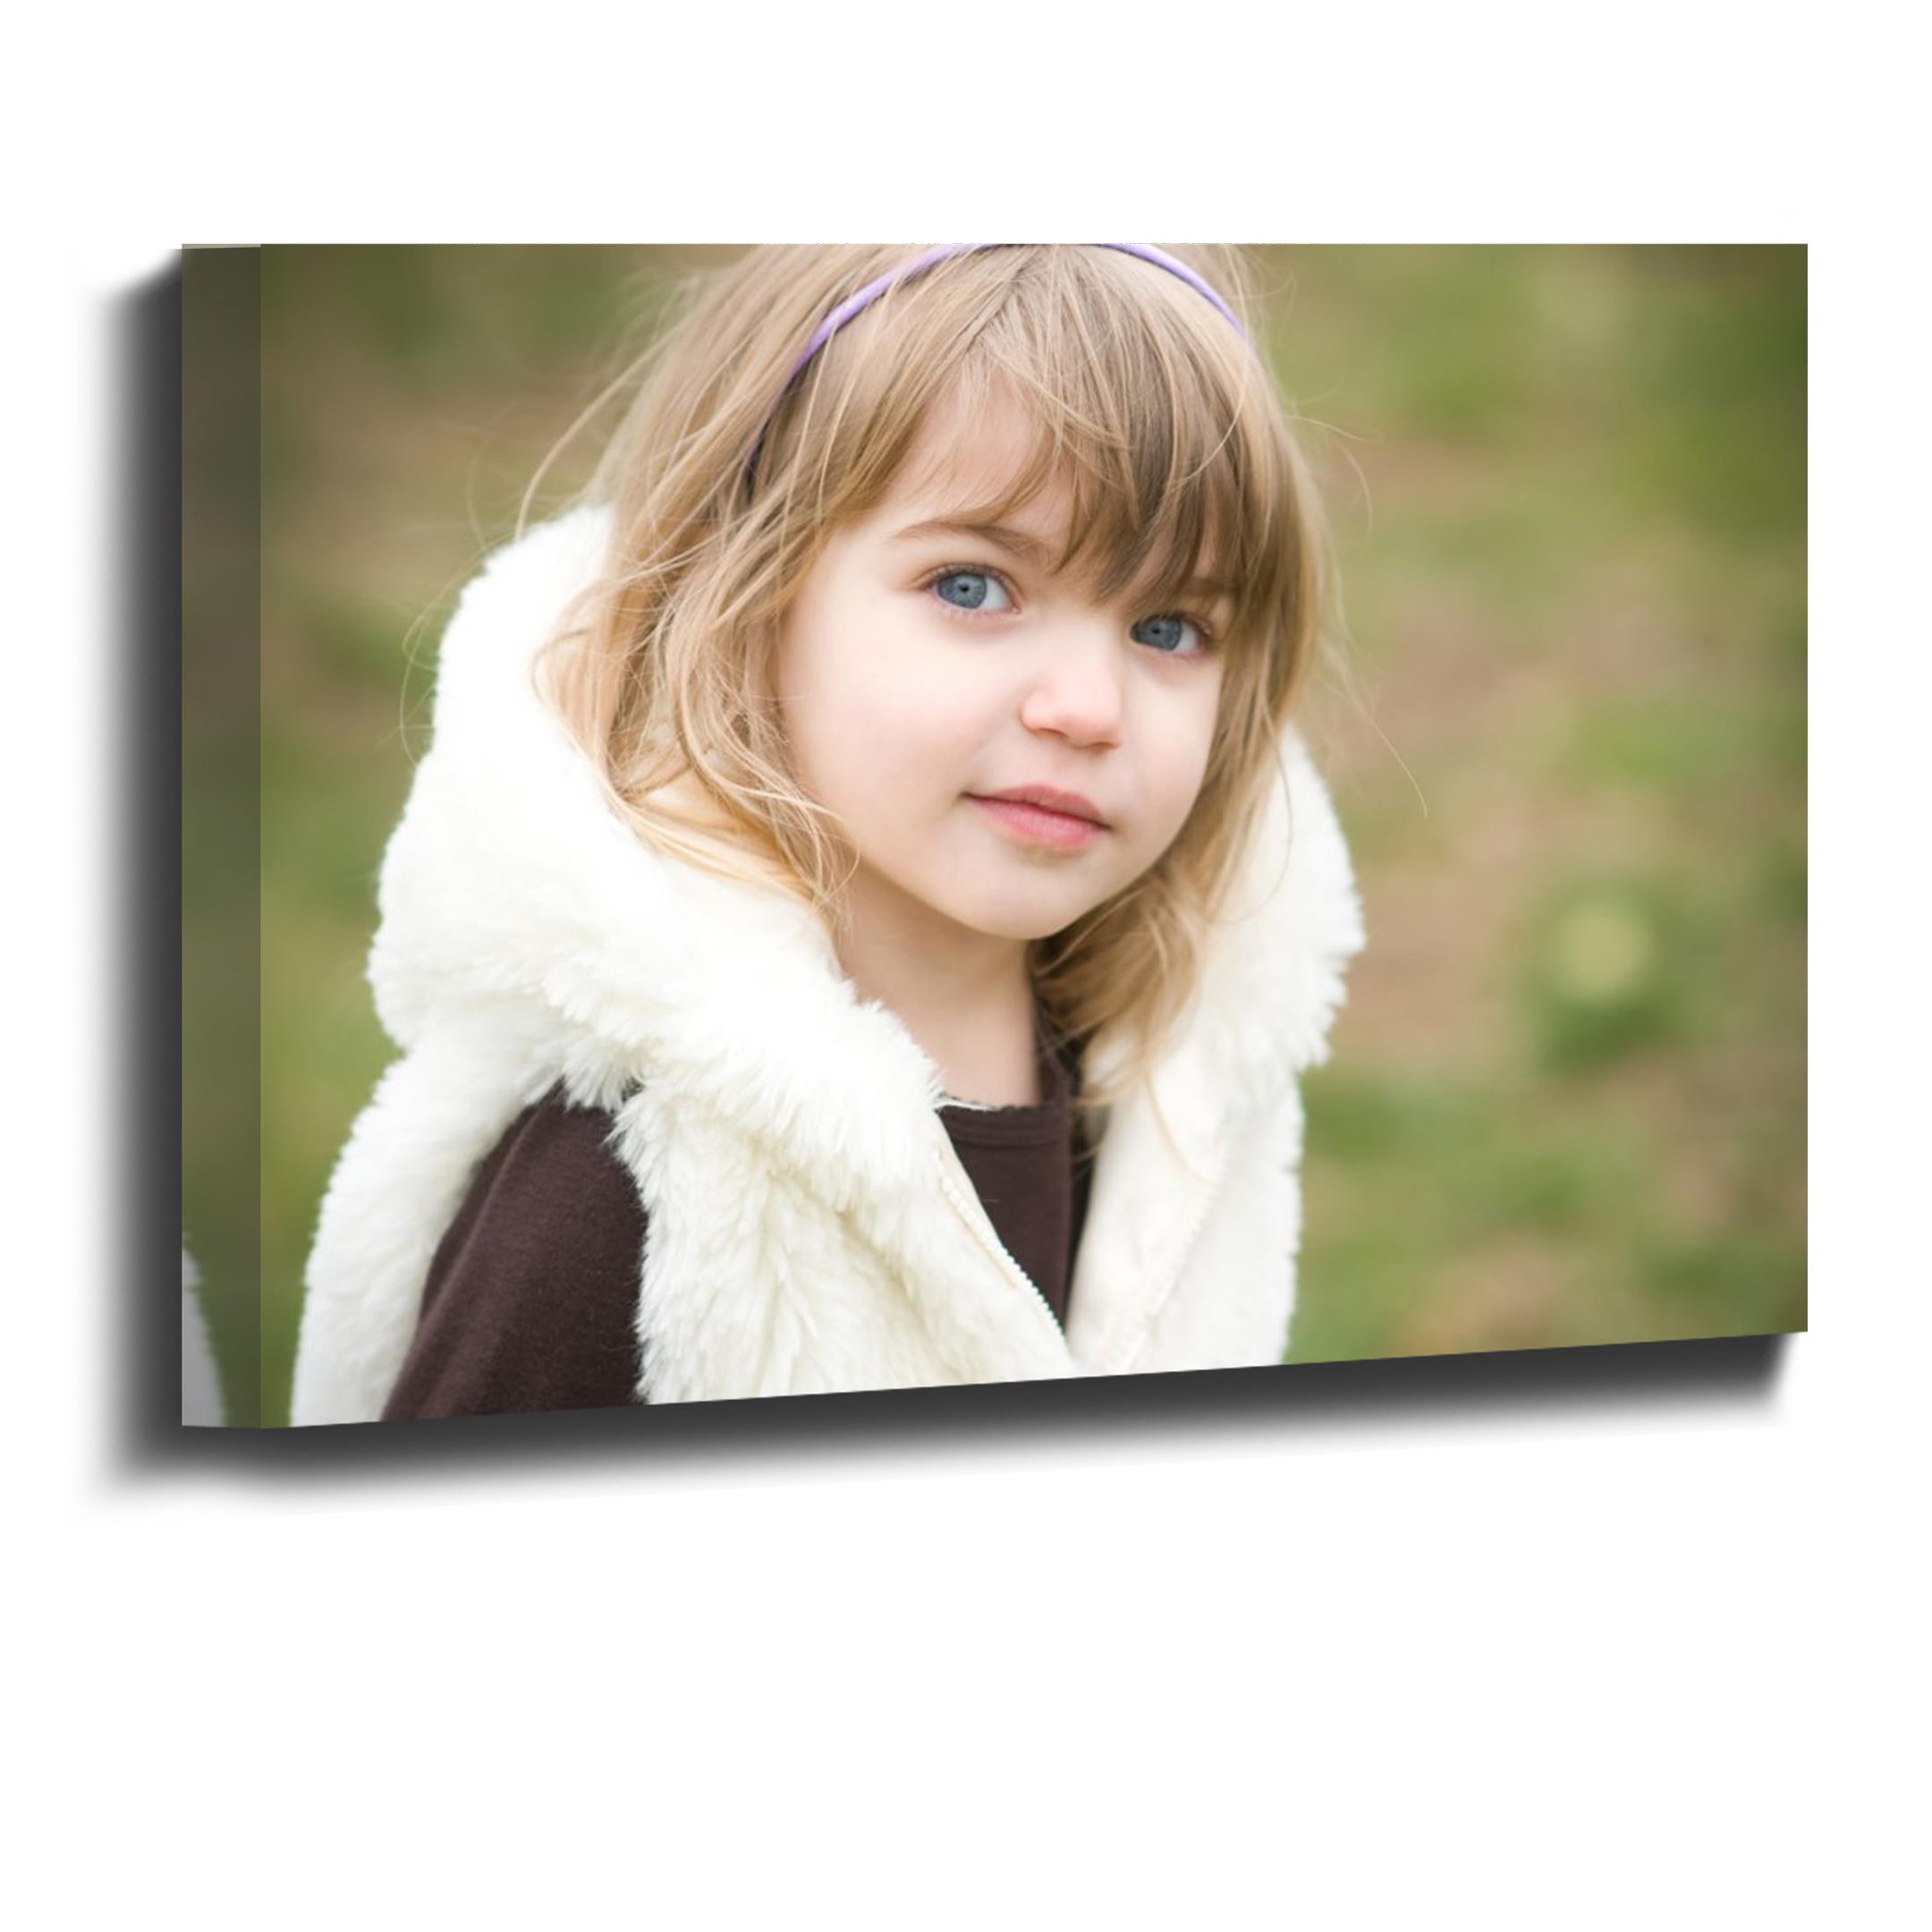 Specialist on line supplier of Canvas prints we supply high quality framed canvas prints at affordable prices.